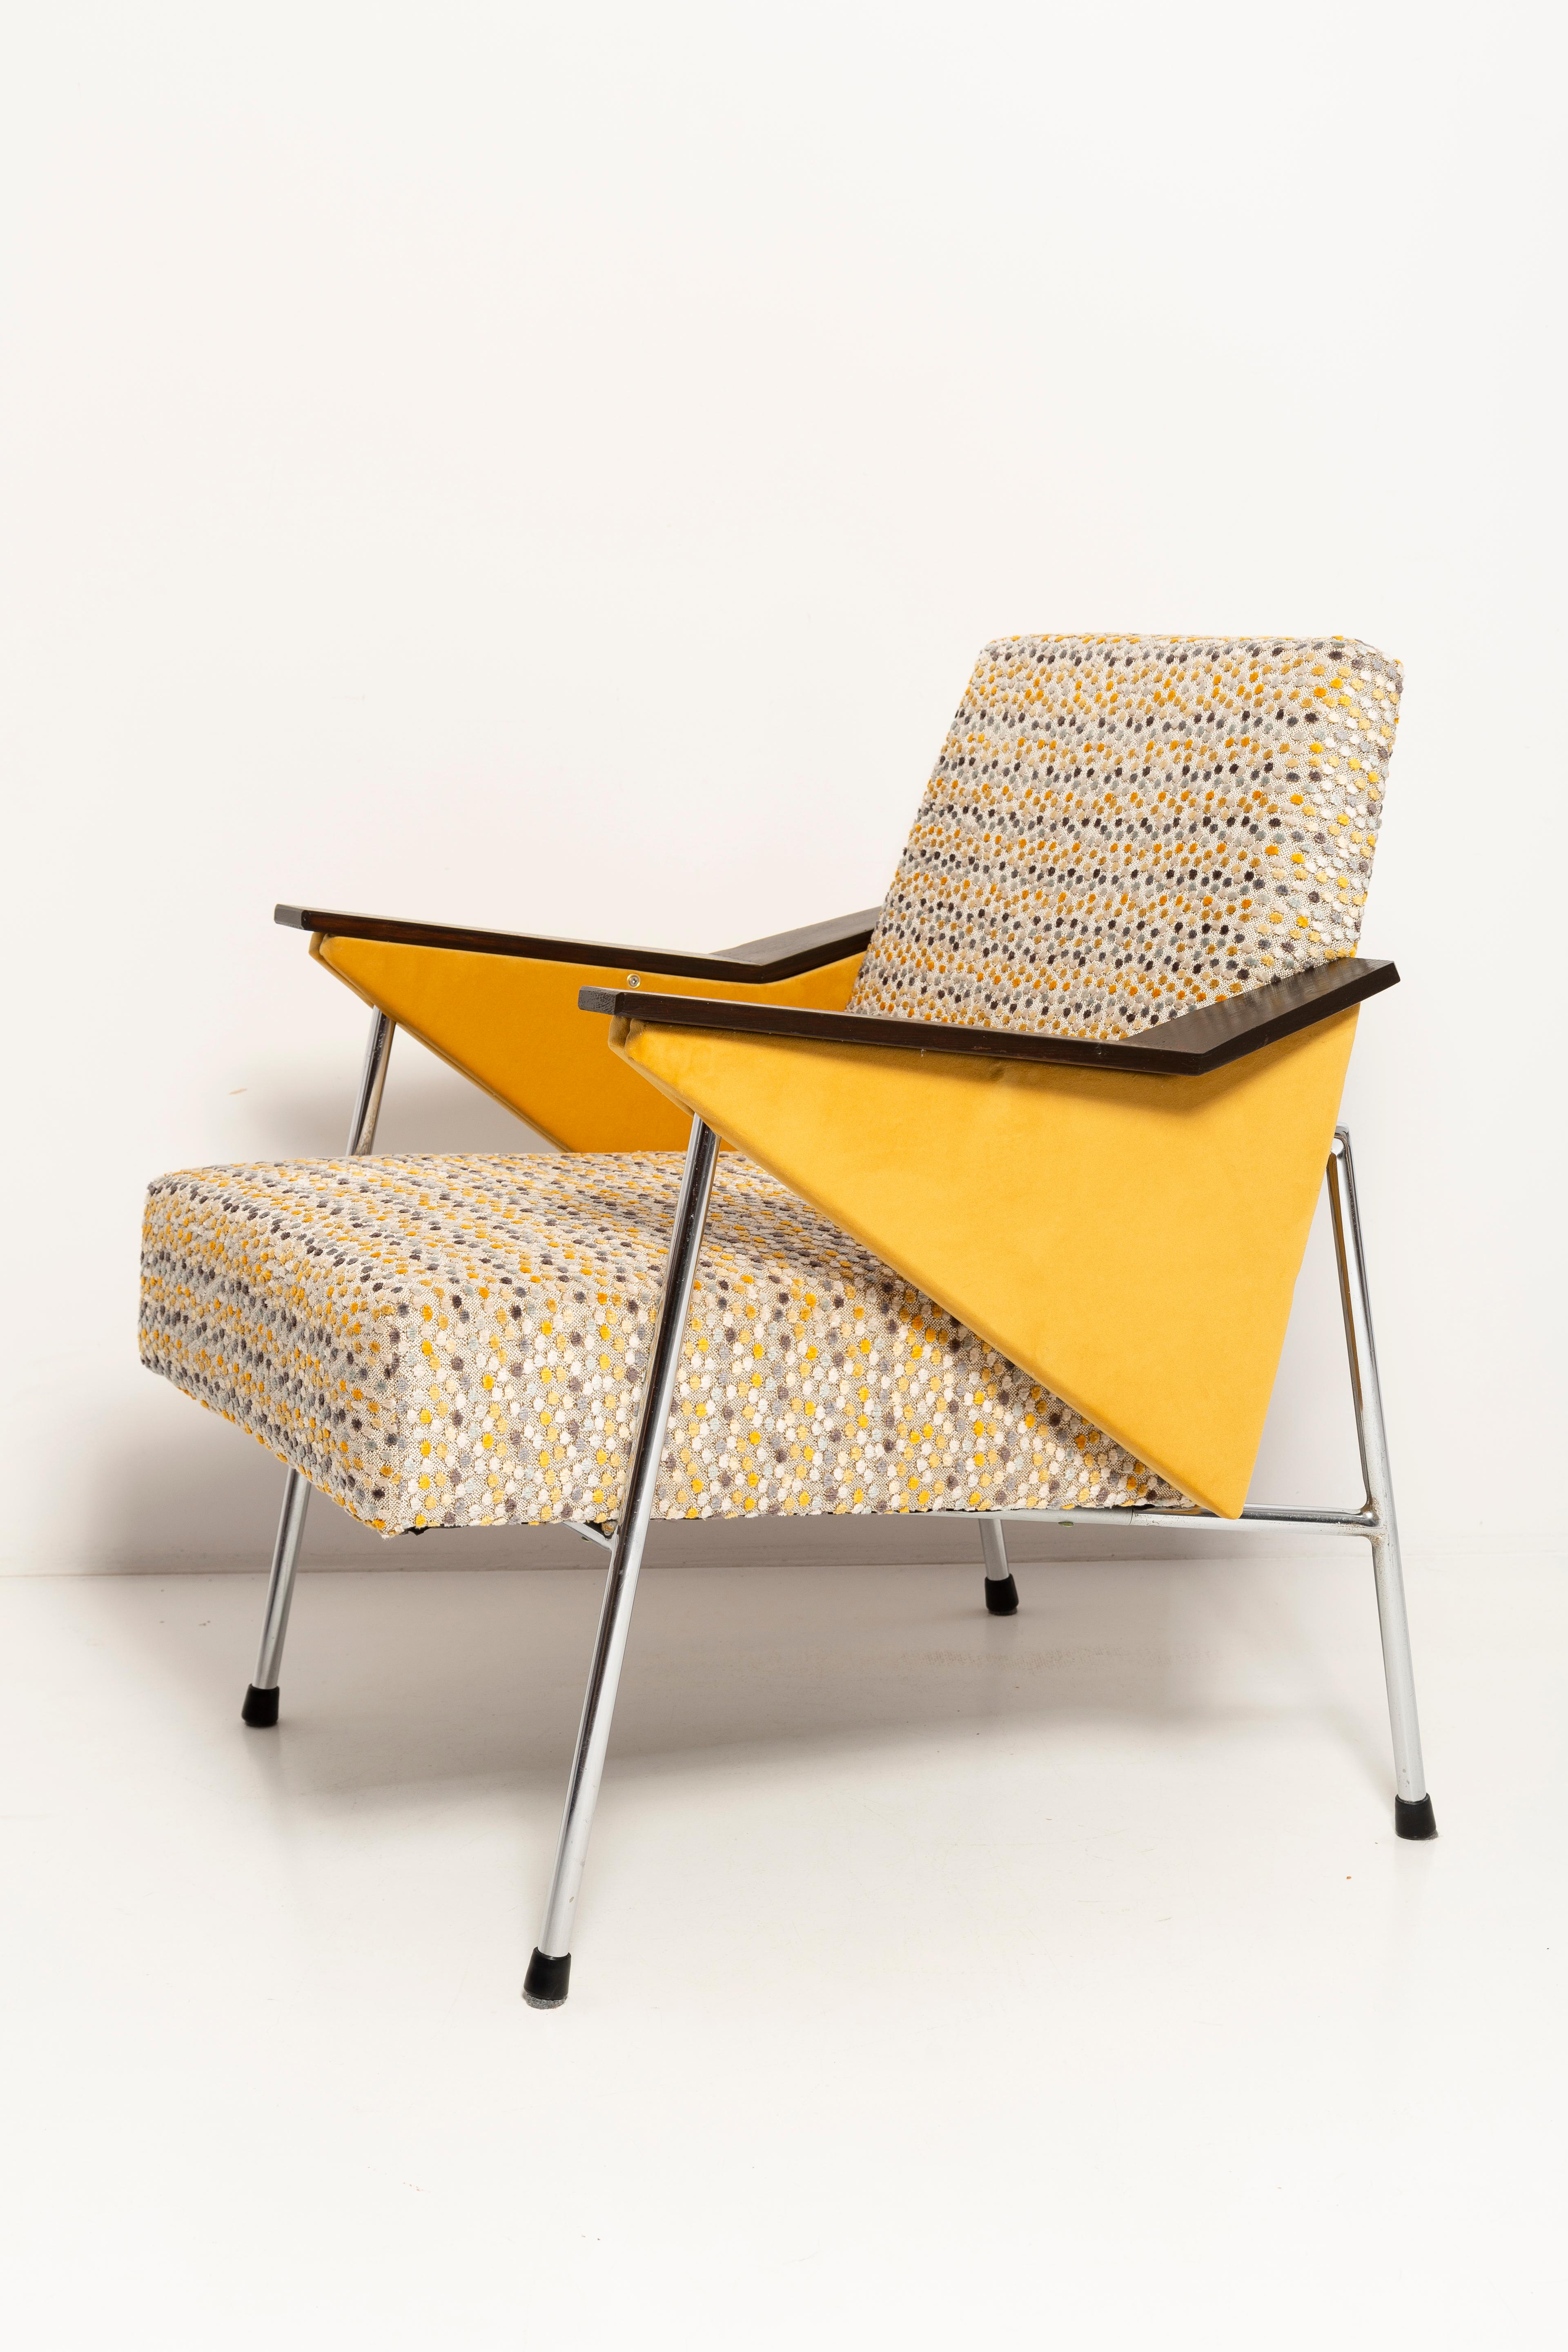 Pair of Mid Century Bat Armchairs, Yellow Dots, Bauhaus Style, Poland, 1970s. For Sale 1